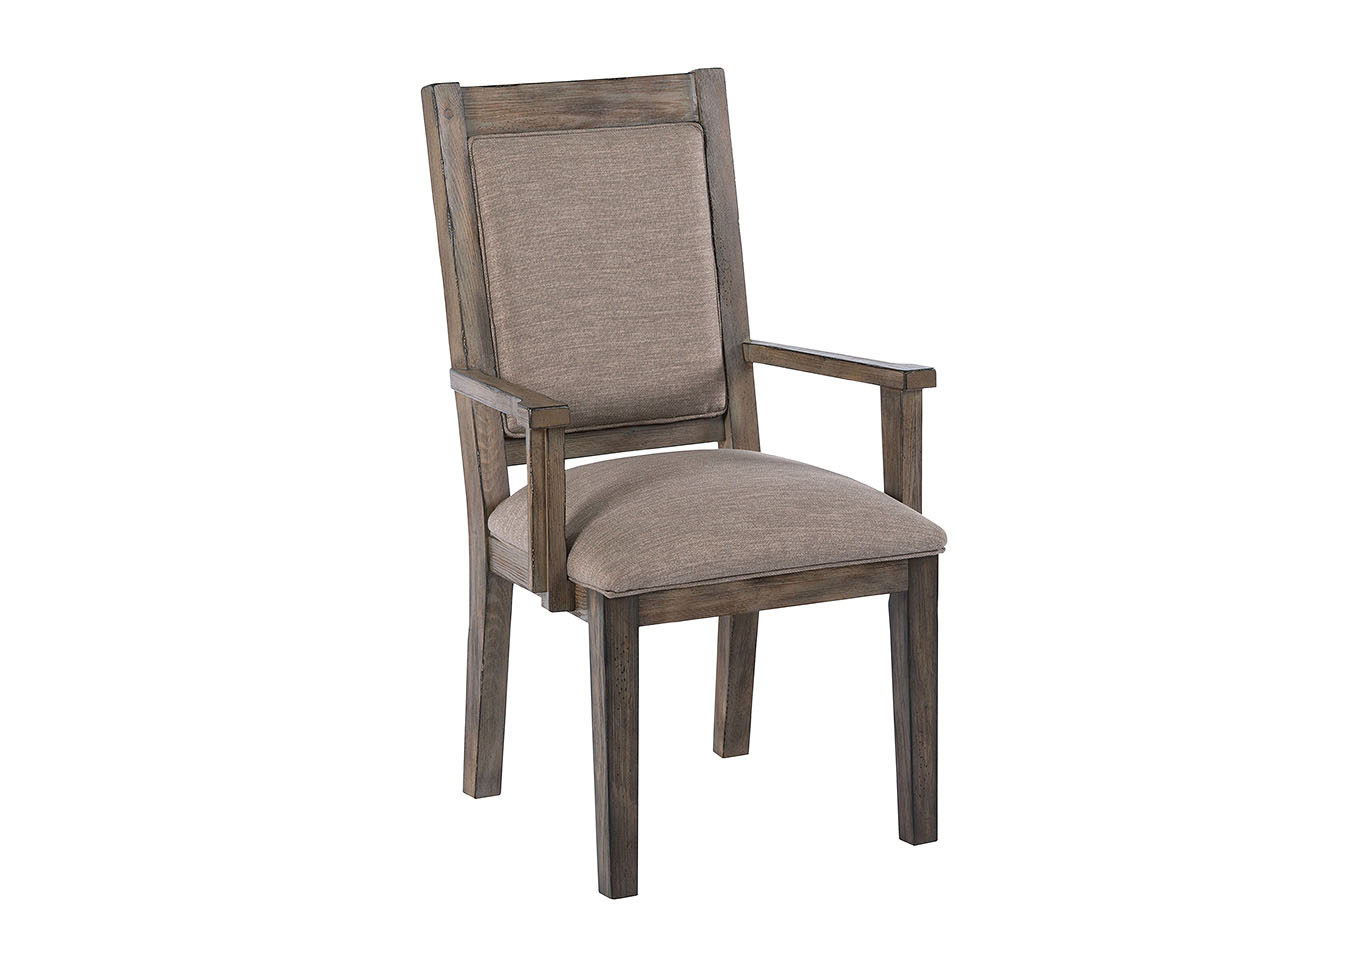 Foundry Driftwood Upholstered Arm Chair (Set of 2),Kincaid